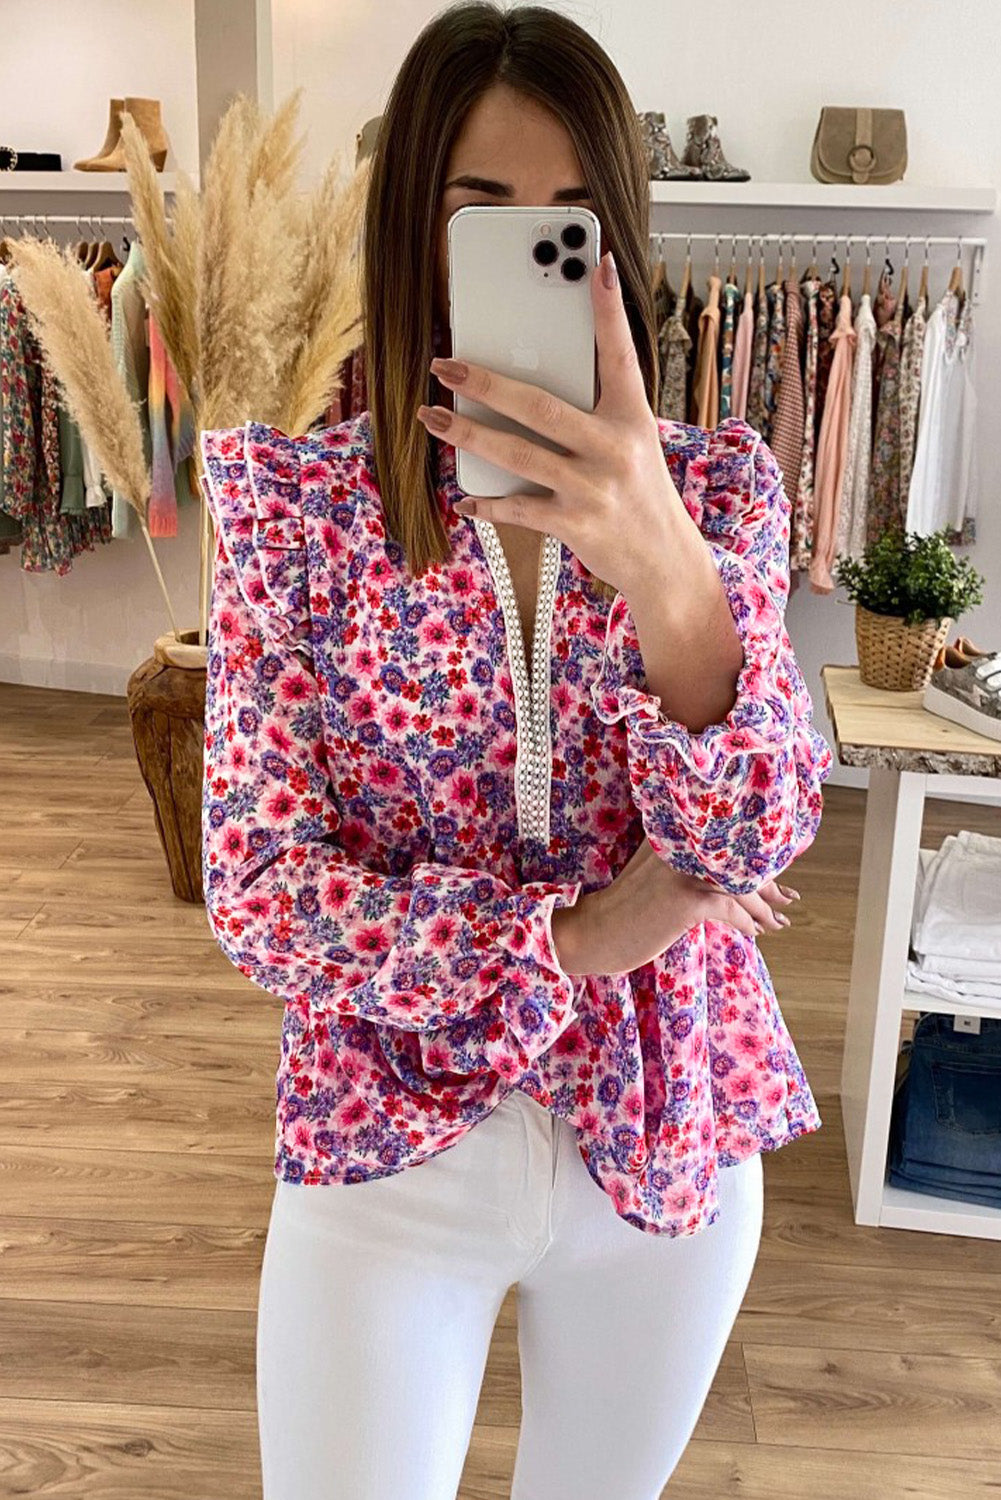 Floral Pattern Peplum Blouse with Ruffles